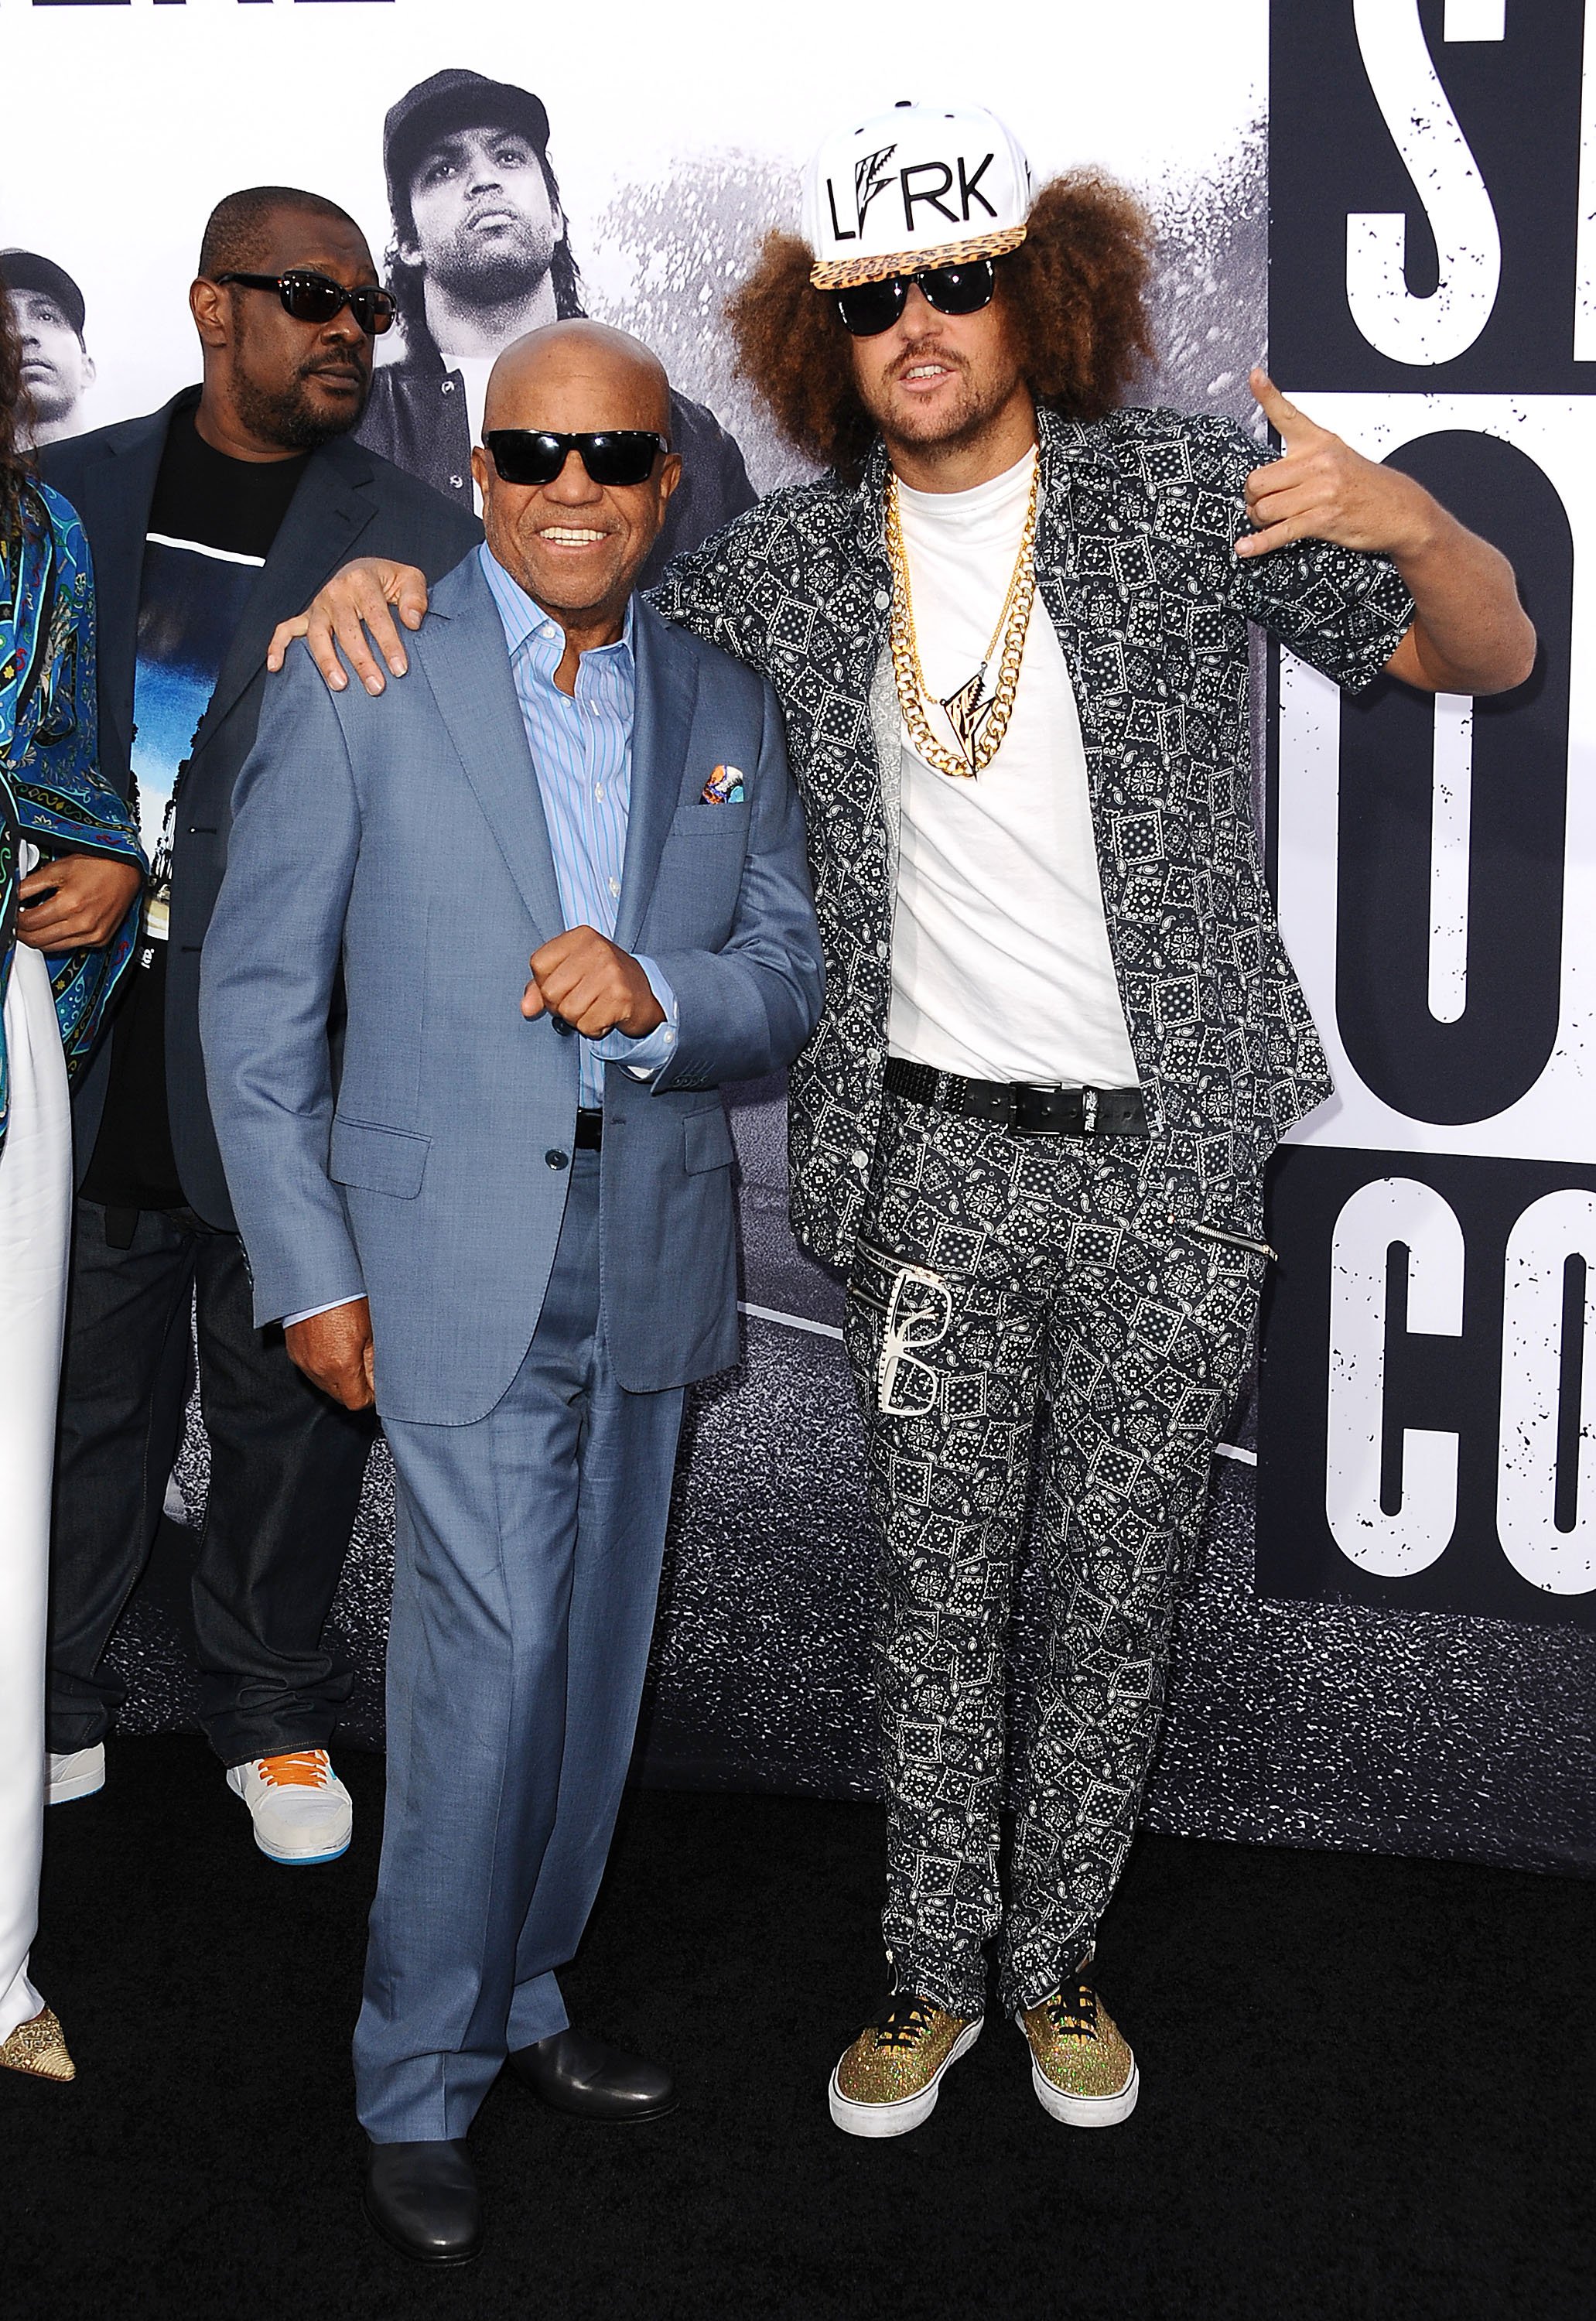 Berry Gordy and Stefan Kendal ‘Redfoo’ Gordy at the premiere of "Straight Outta Compton" on August 10, 2015, in California | Source: Getty Images 